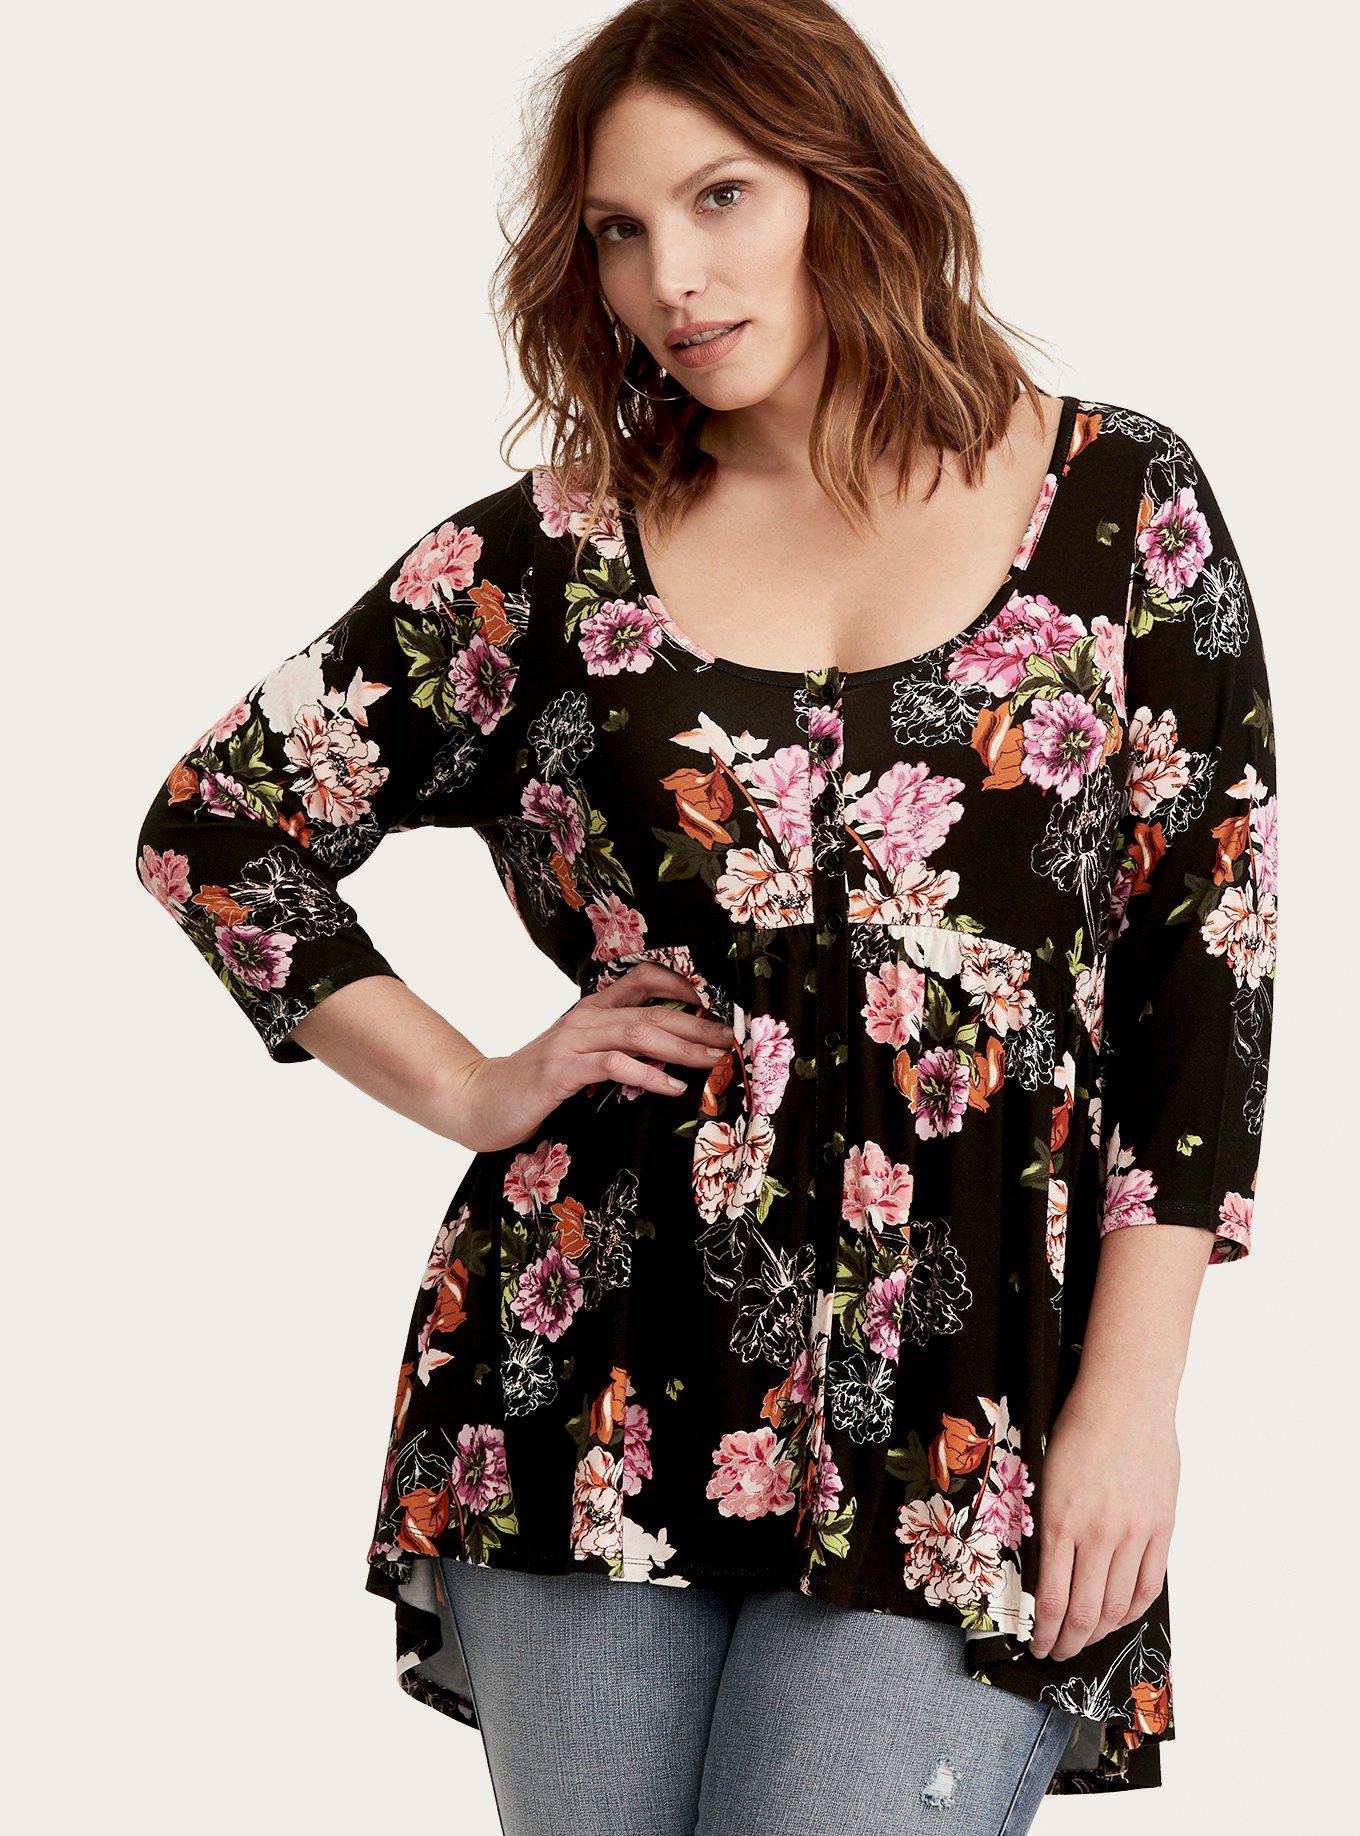 Plus Size - Babydoll Super Soft Button-Front 3/4 Sleeve Top - Torrid